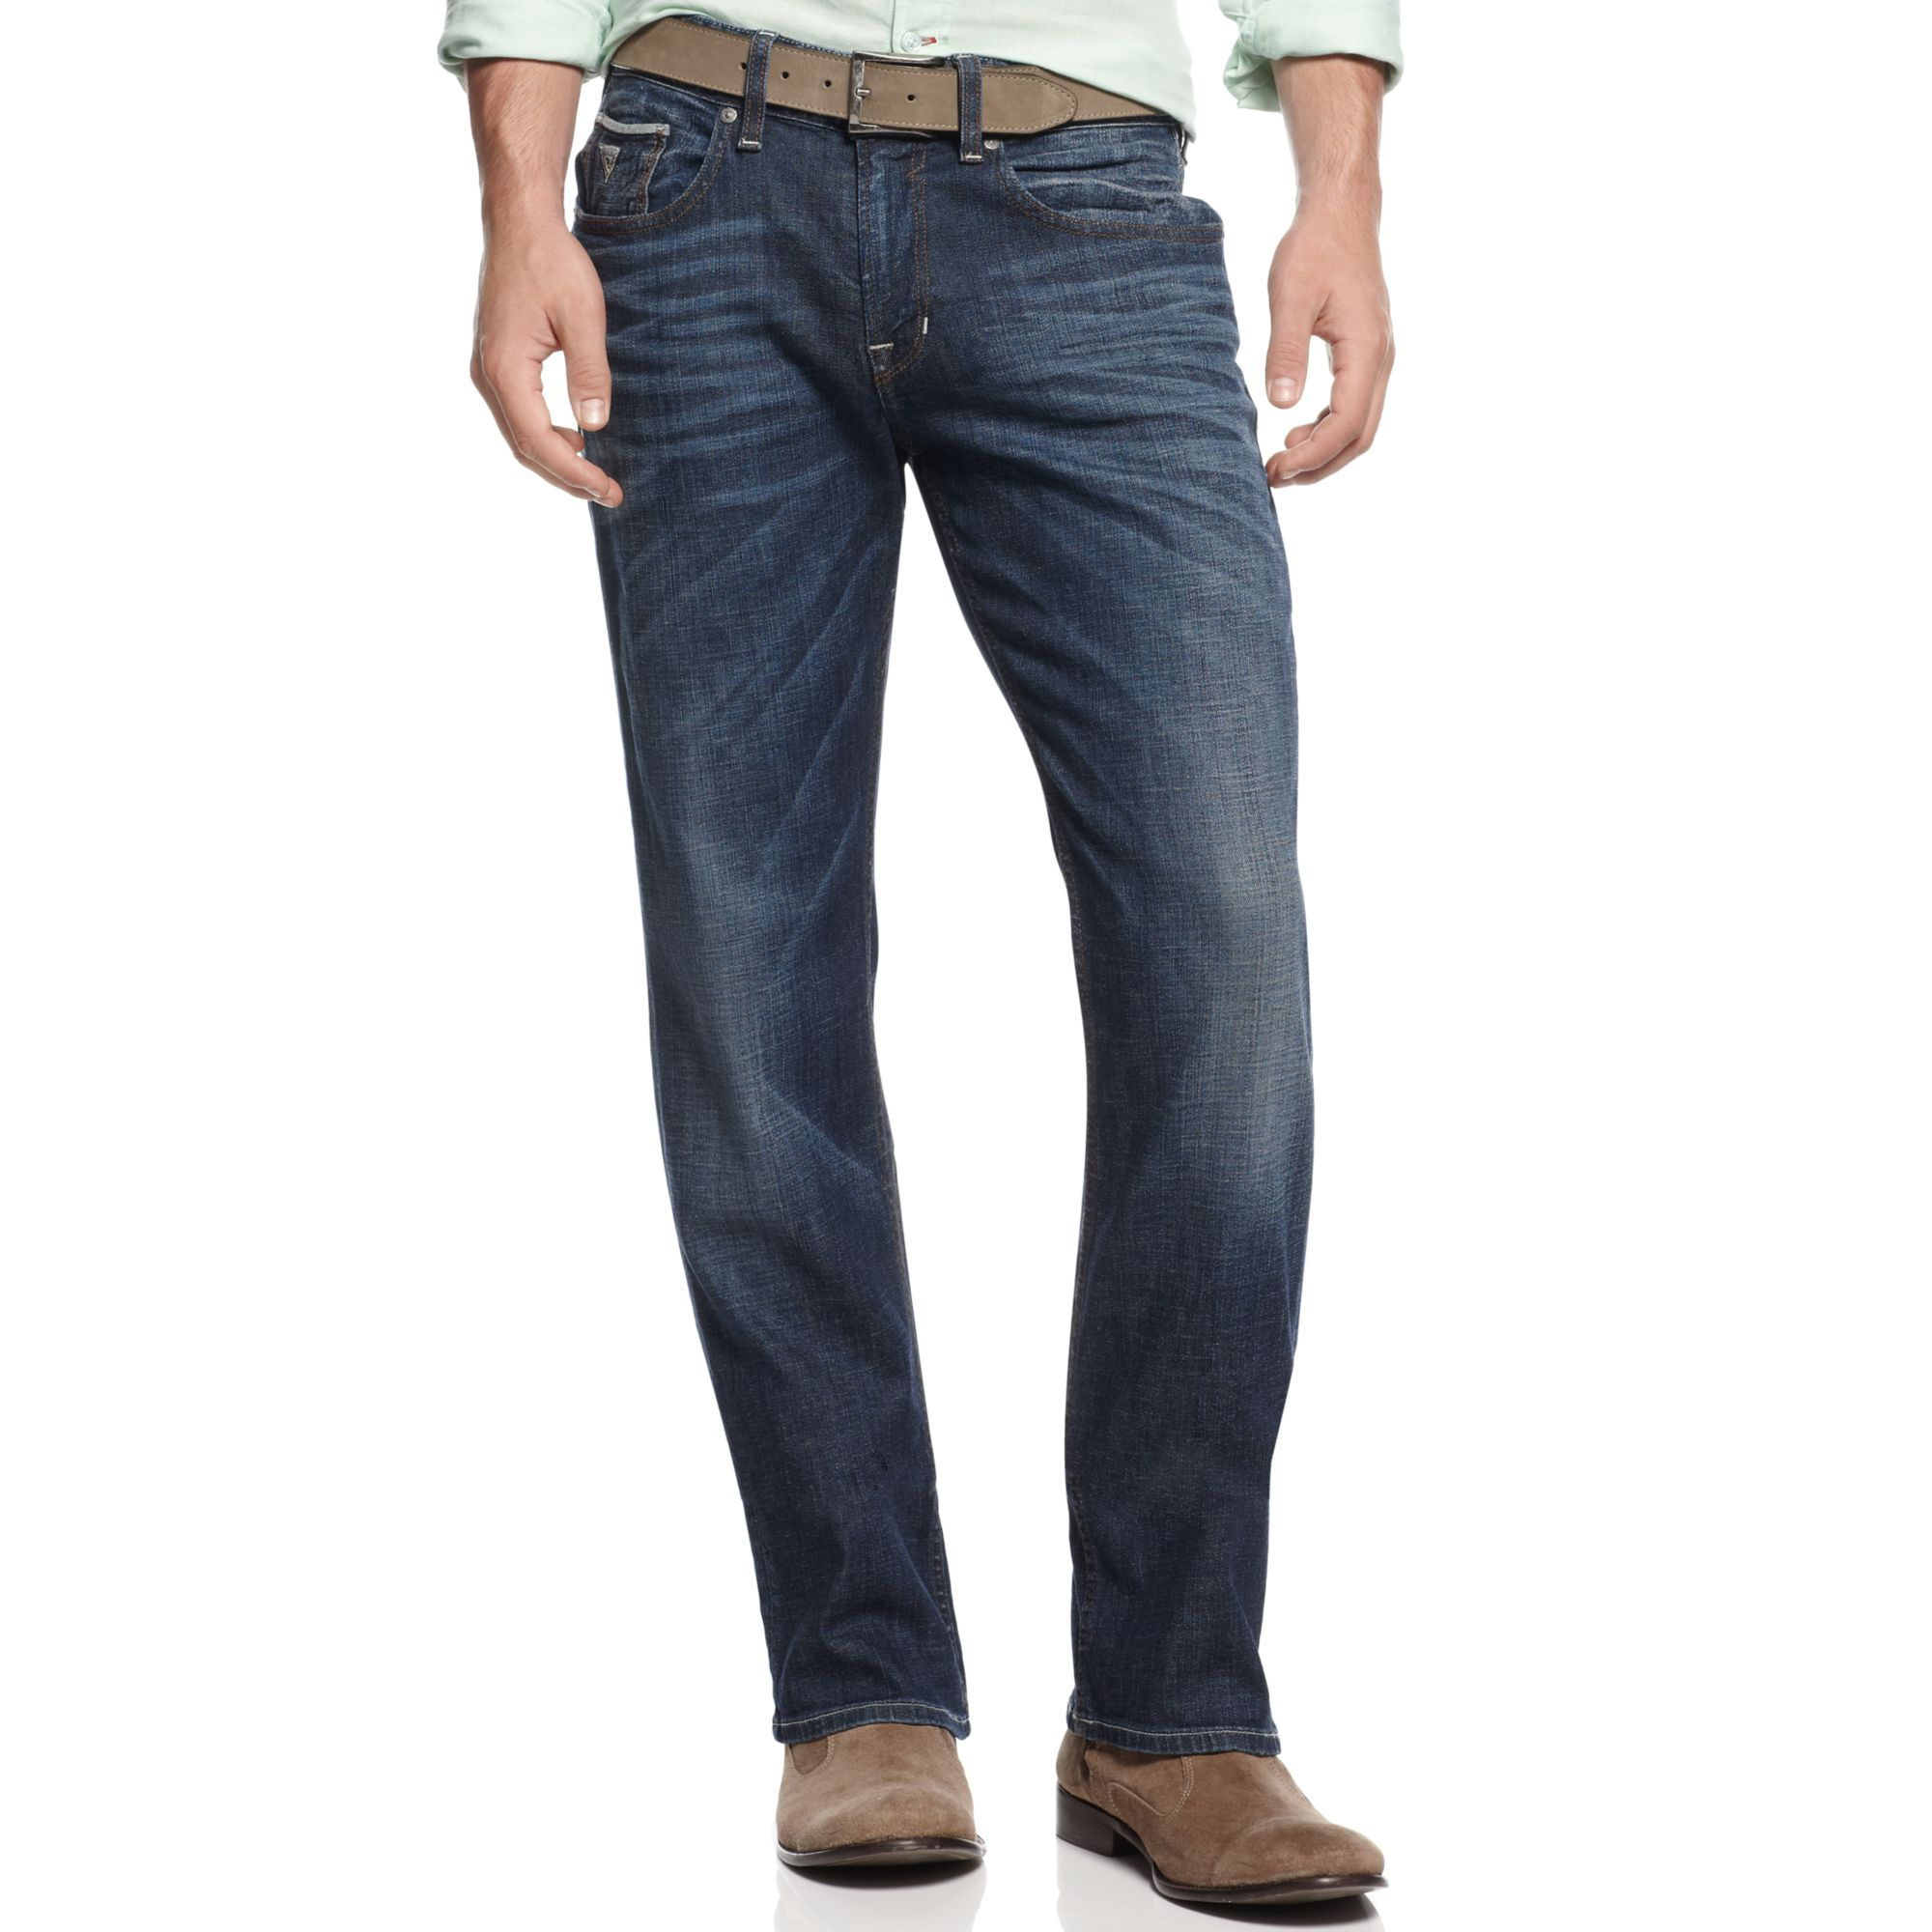 Lyst - Guess Falcon 104 Jeans in Blue for Men